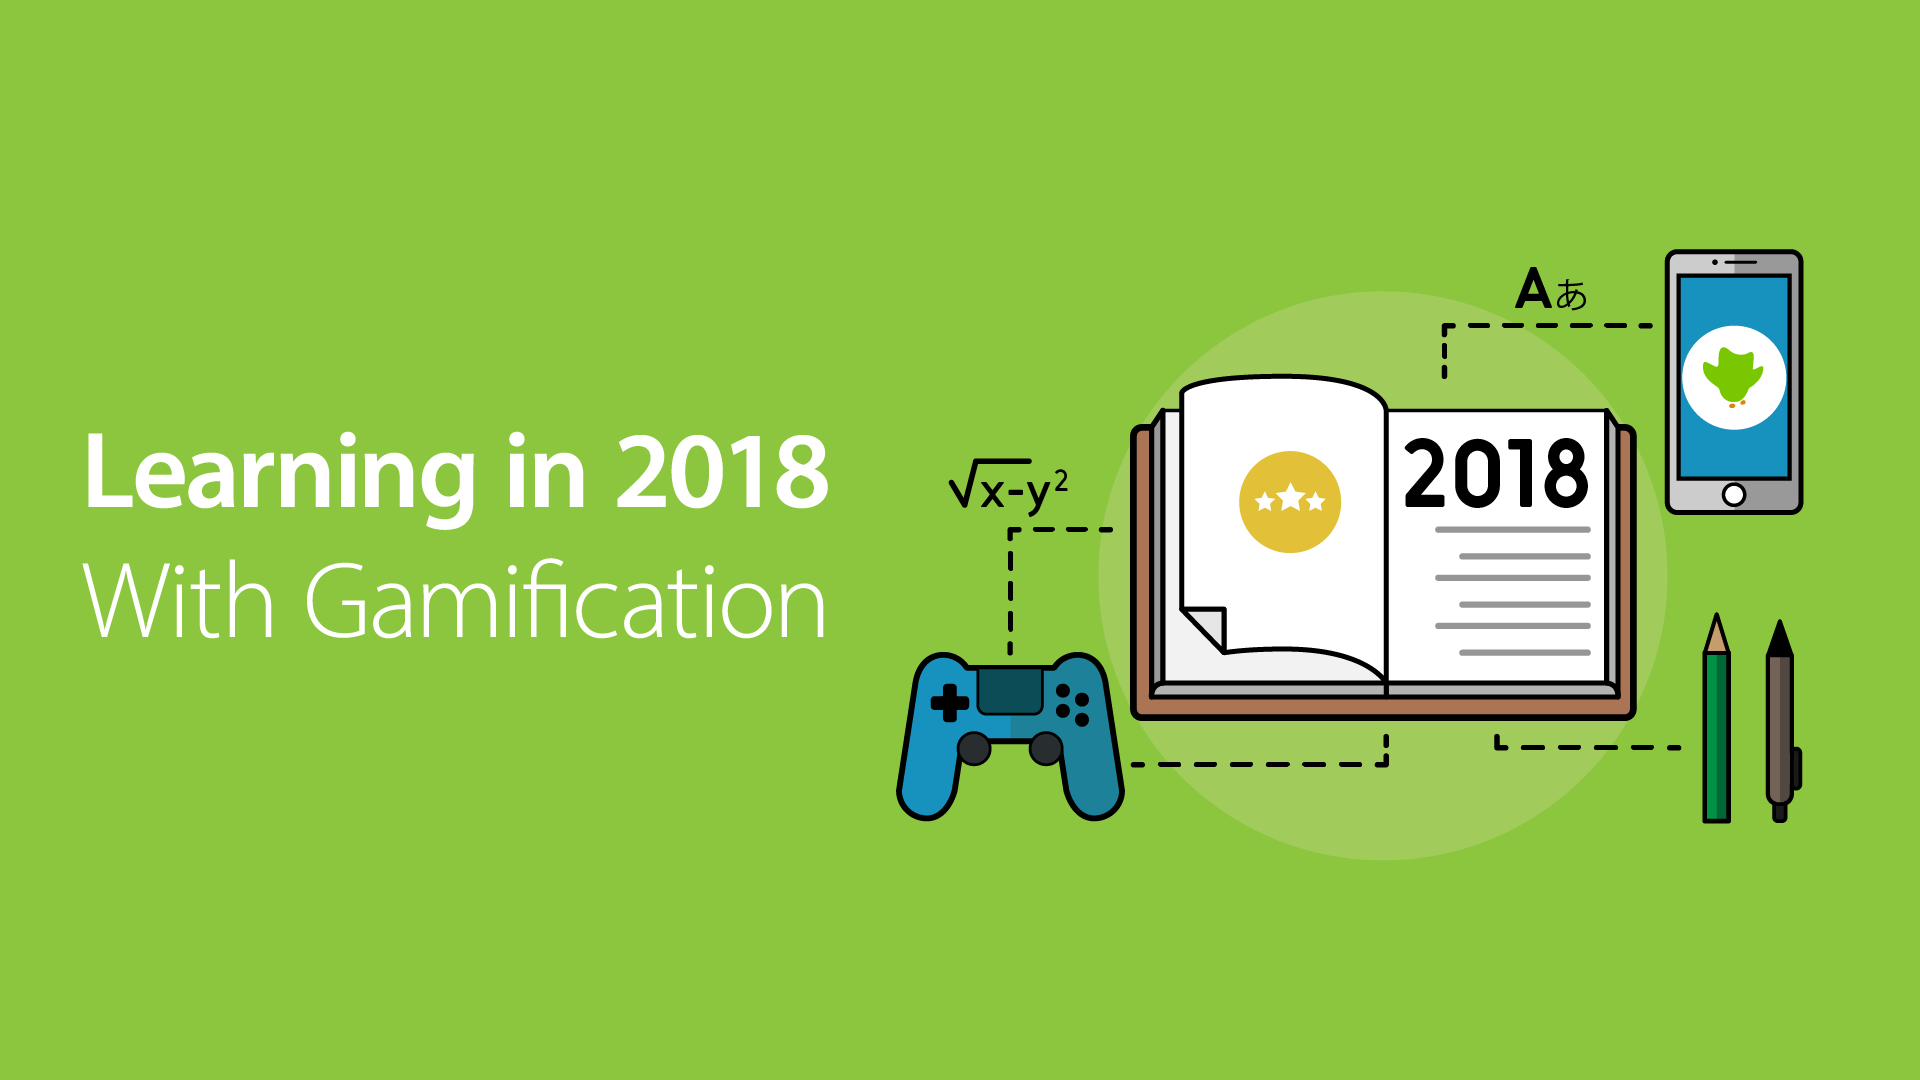 Gamified Learning in 2018